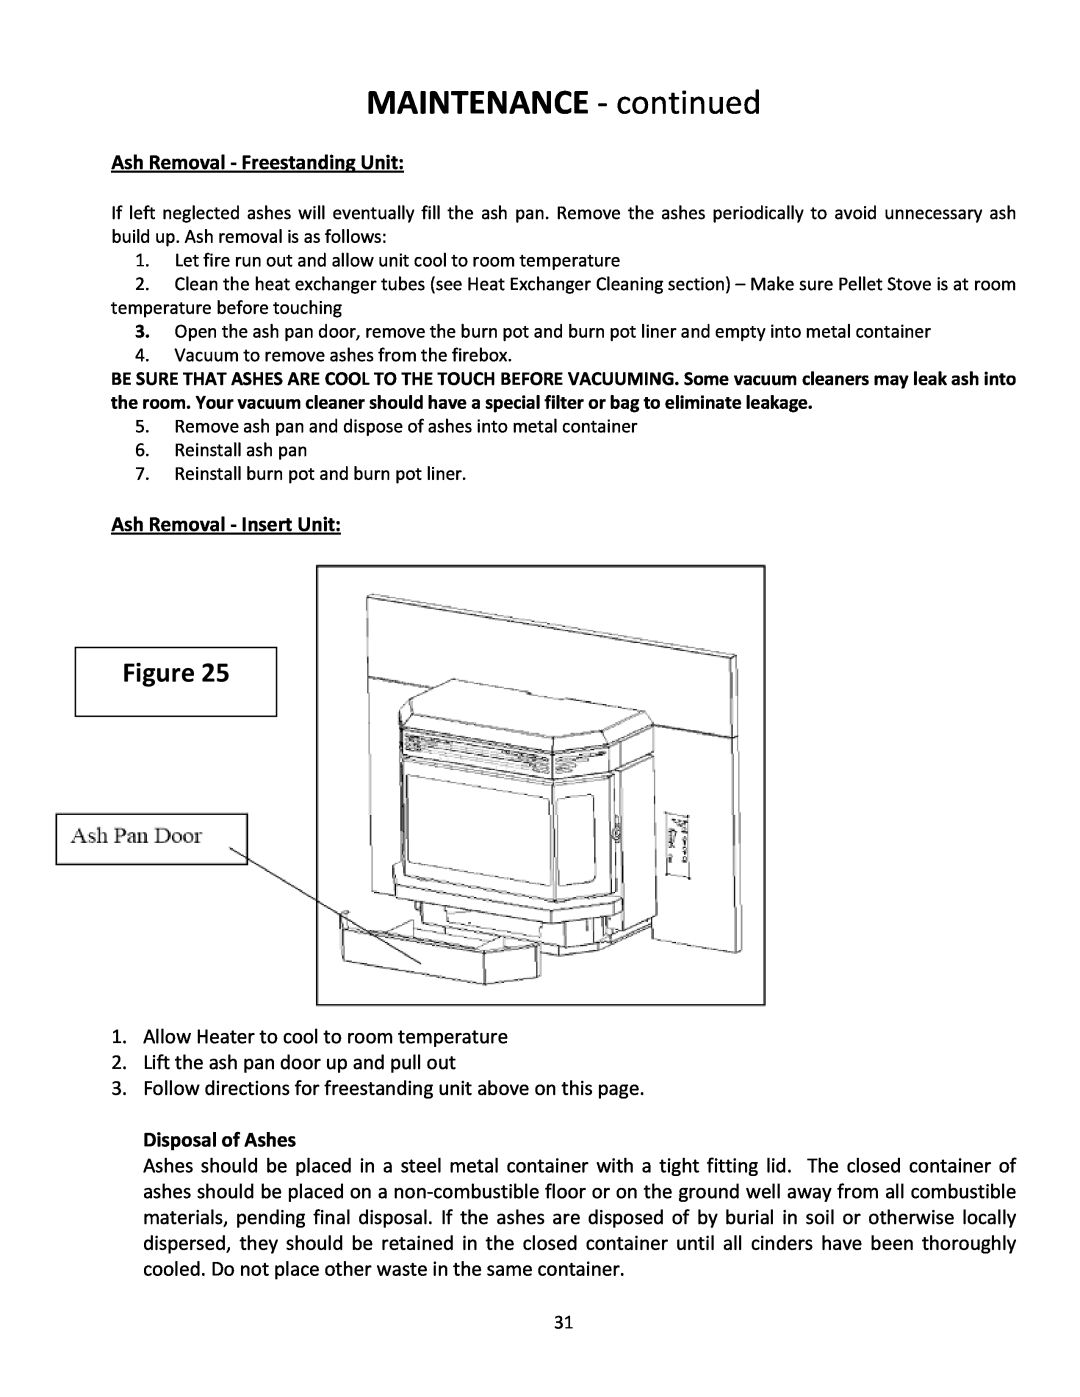 United States Stove 5660(I) manual MAINTENANCE ‐ continued, Ash Removal ‐ Freestanding Unit, Ash Removal ‐ Insert Unit 